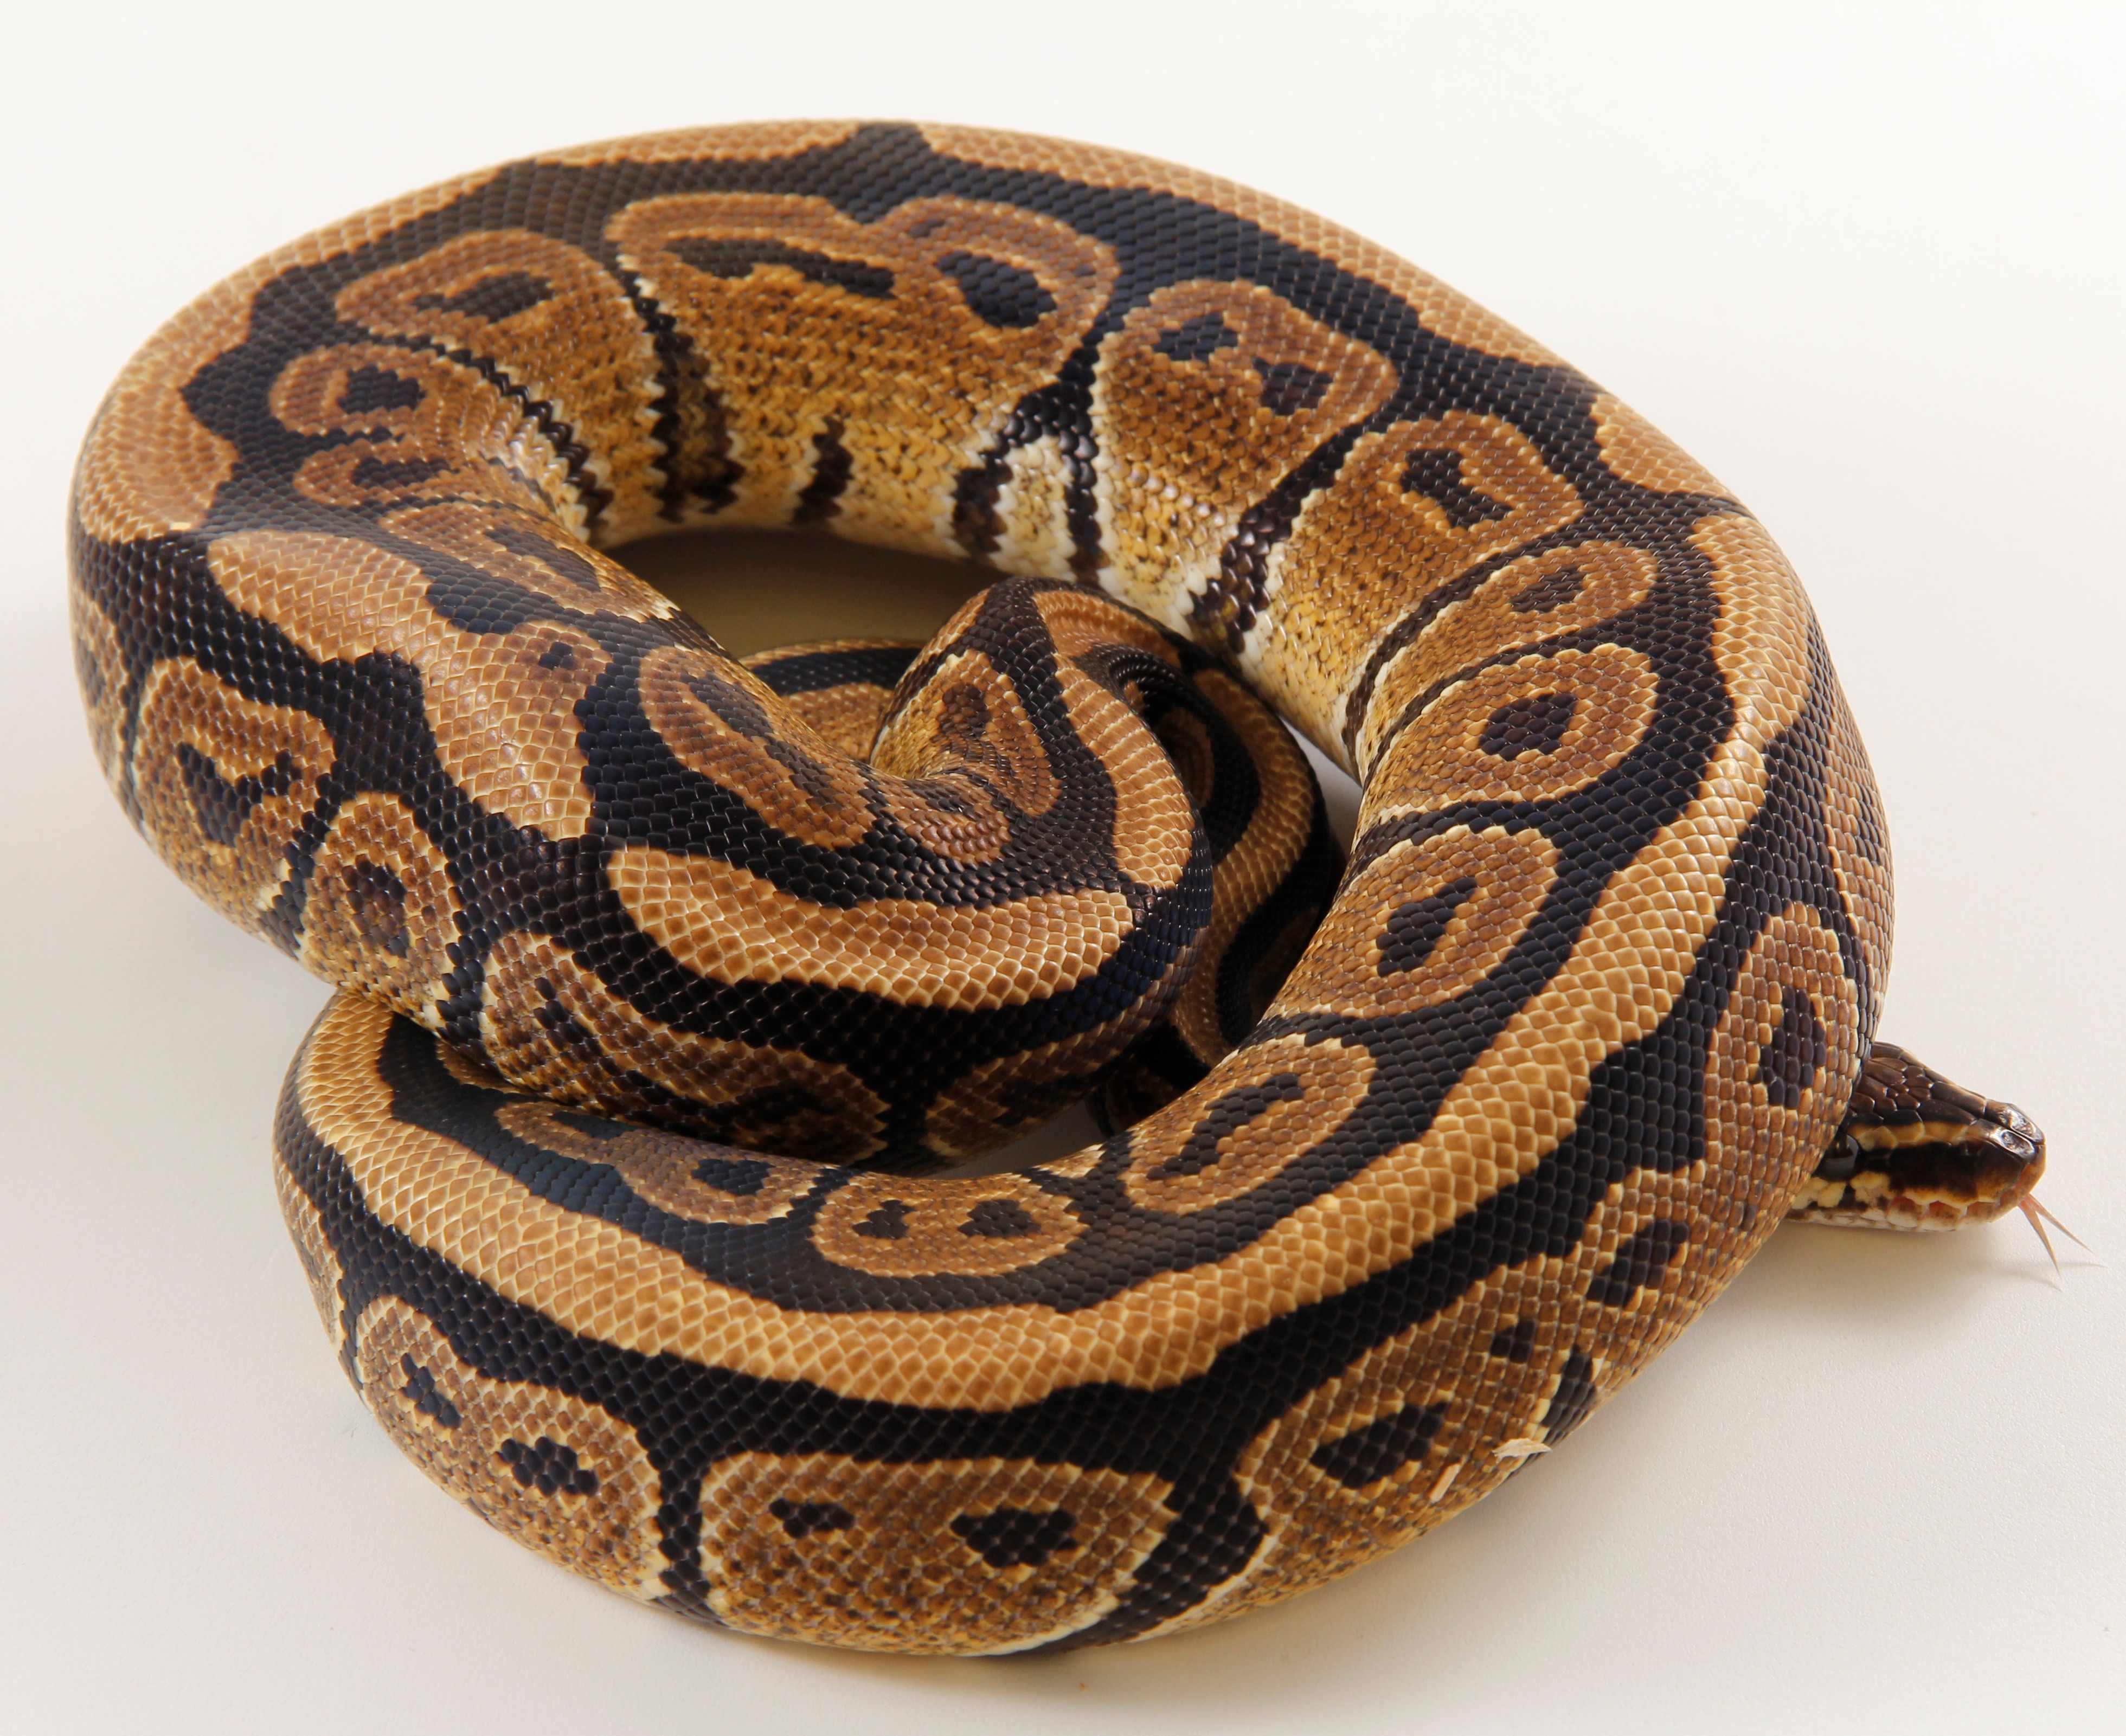 Specter Ball Python by The Gourmet Rodent